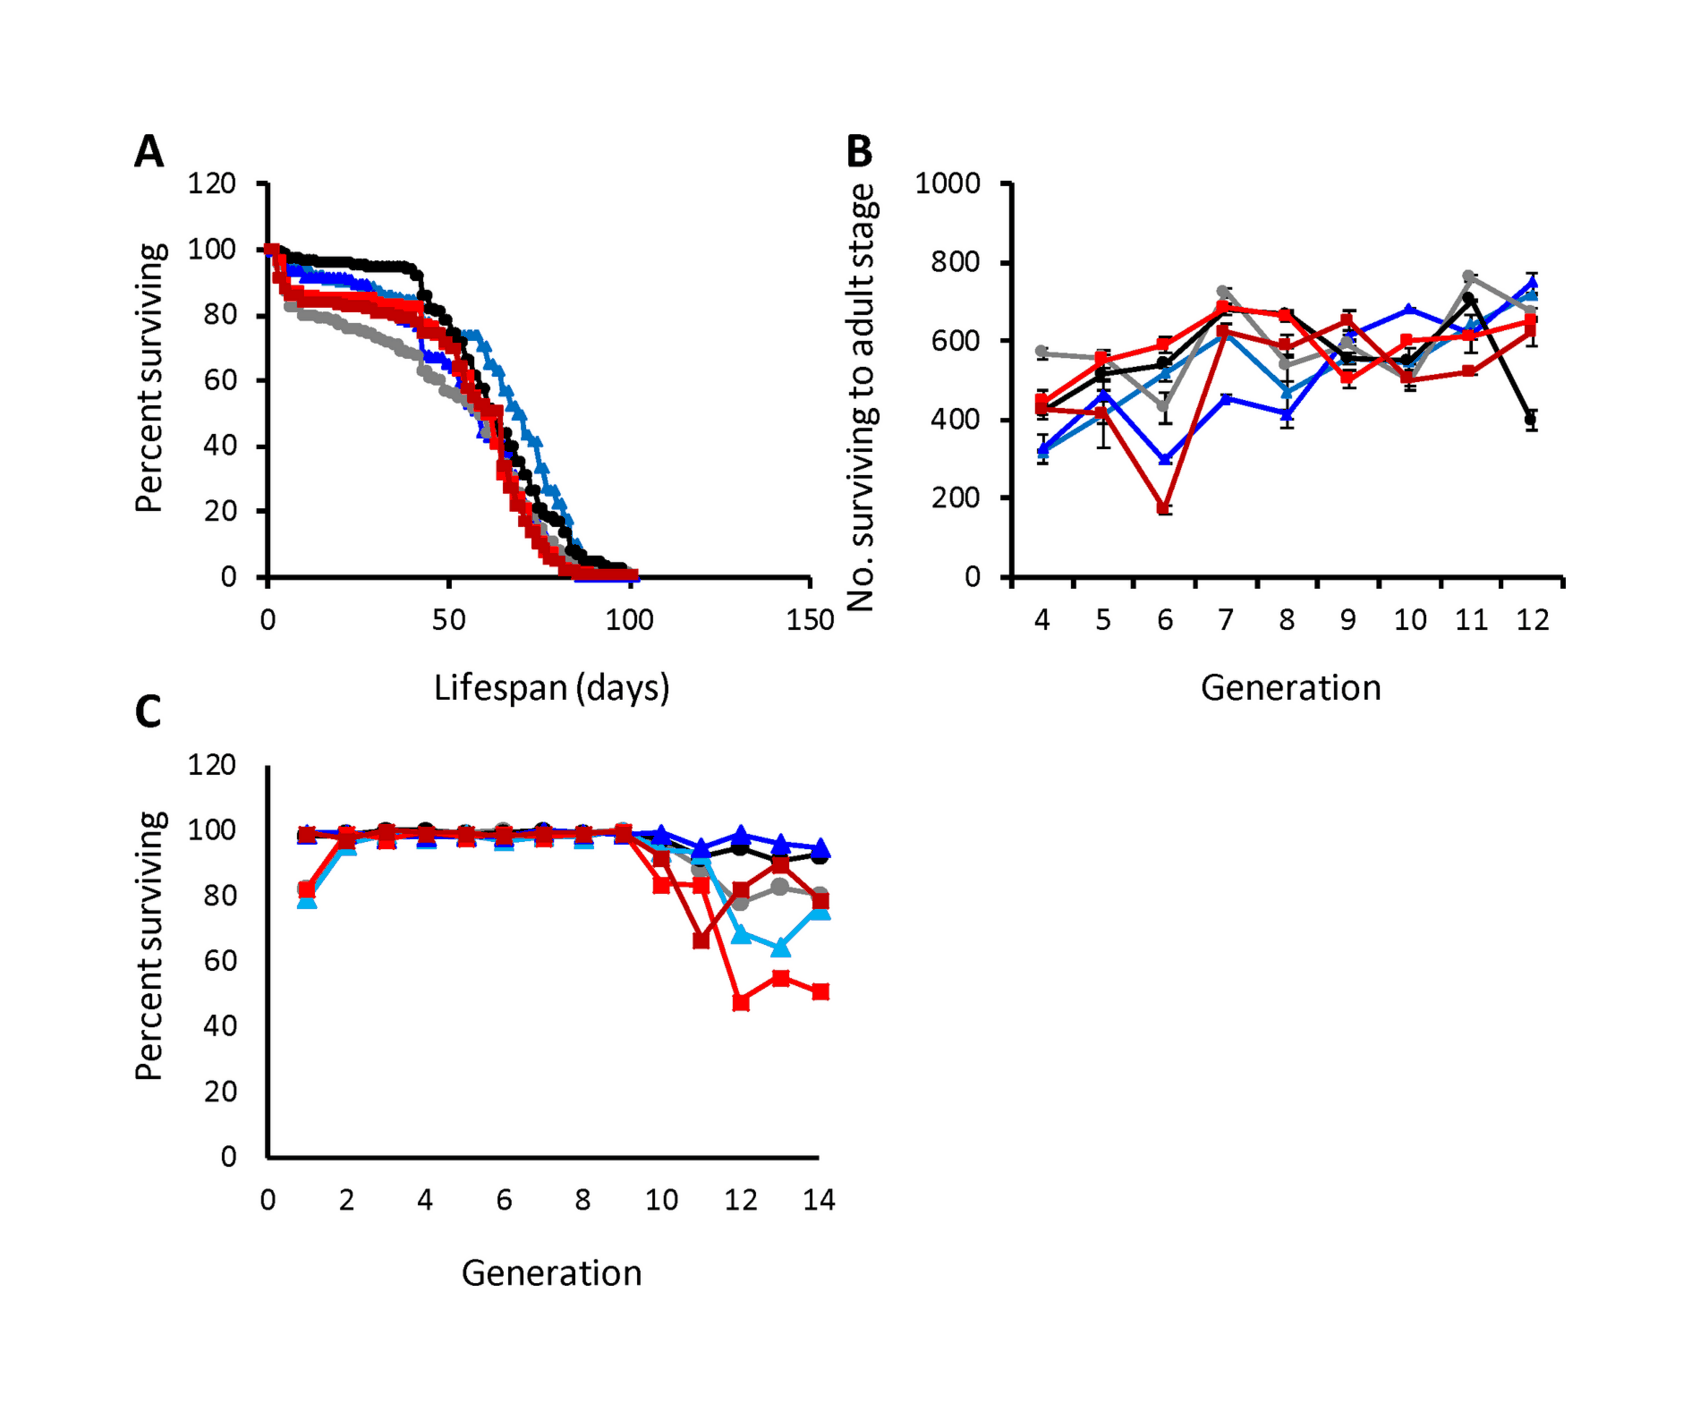 Figure 4: The response of life history traits to selection for long or short night sleep duration. (A), percentage flies surviving versus lifespan; (B), number of flies surviving to the adult stage versus generation of selection; (C), percentage of males and females surviving sleep assay. Light blue and dark blue triangles indicate Replicate 1 and Replicate 2 populations selected for long sleep; Light red and dark red squares indicate Replicate 1 and Replicate 2 populations selected for short sleep; and light gray and black circles indicate Replicate 1 and Replicate 2 control populations.